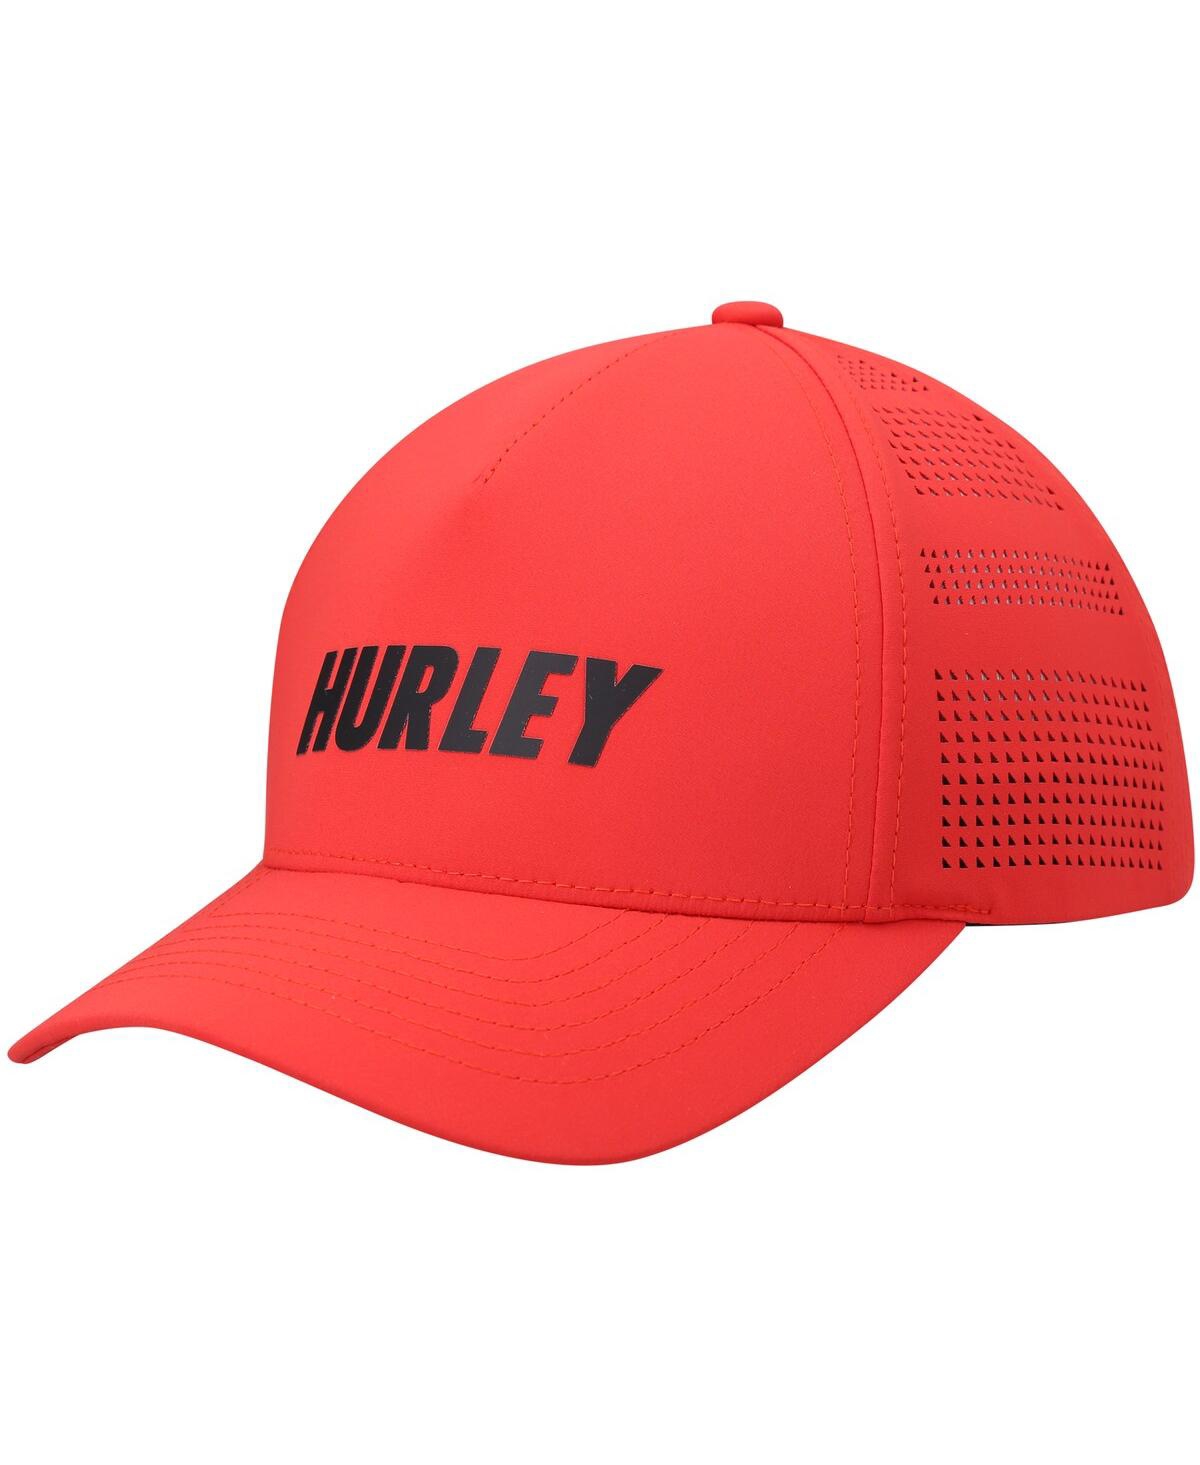 Hurley Men's  Red Canyon Adjustable Hat